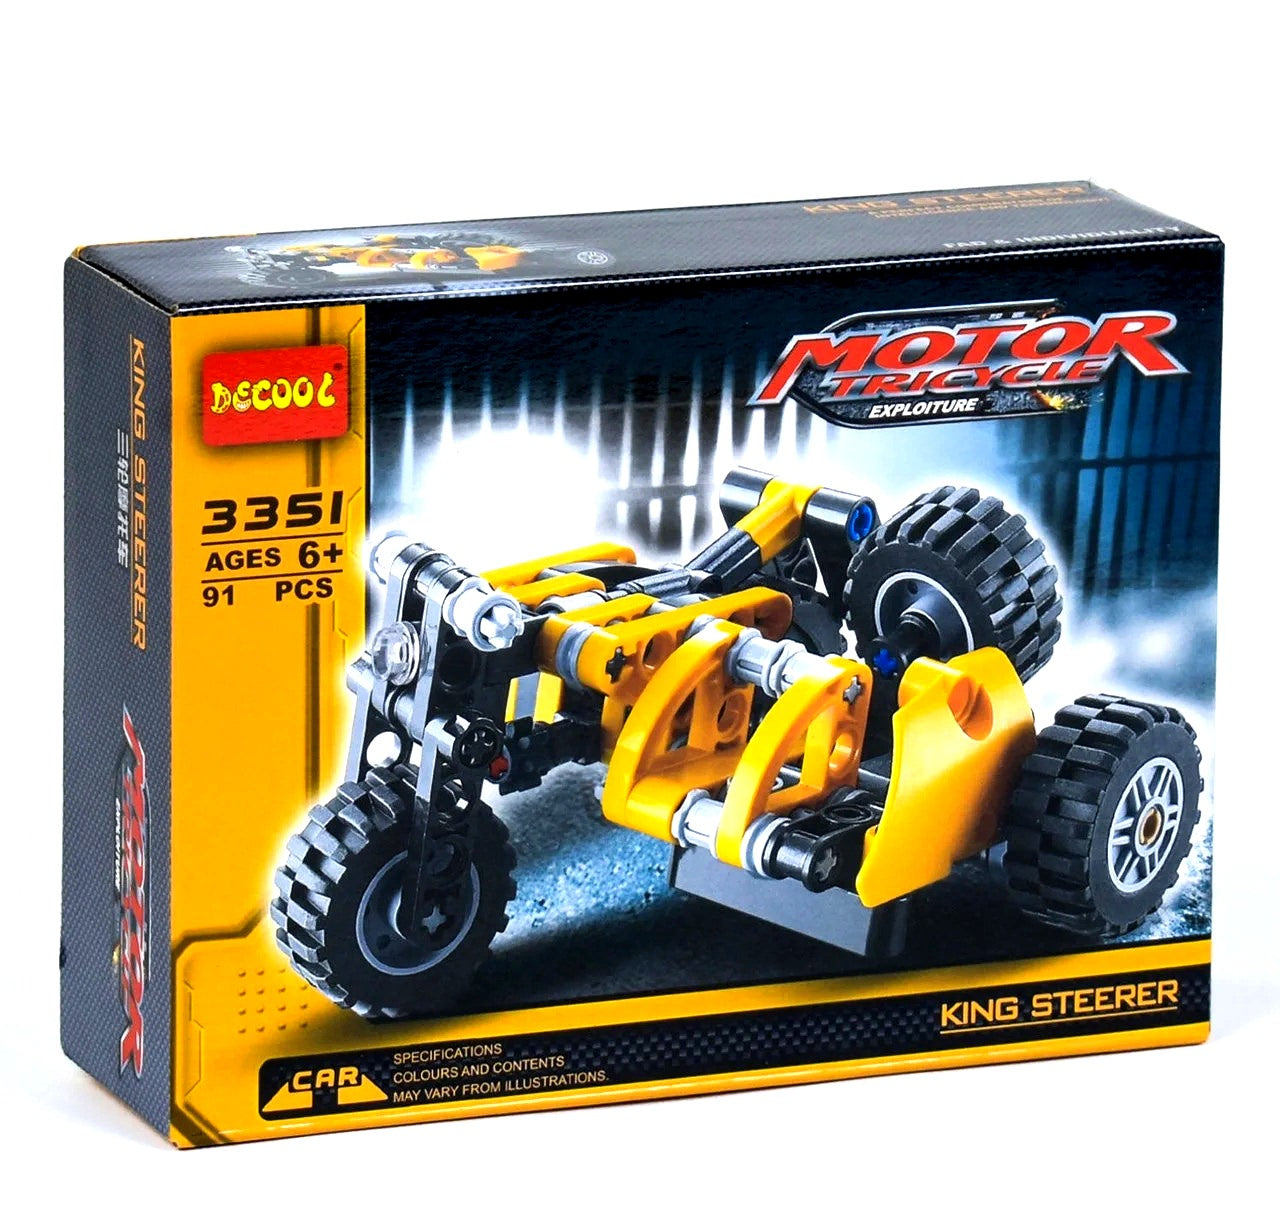 Decool 3351 Motor Tricycle Exploiter 91 Pieces ABS Plastic Building Block Sets Toys  (Multicolor)